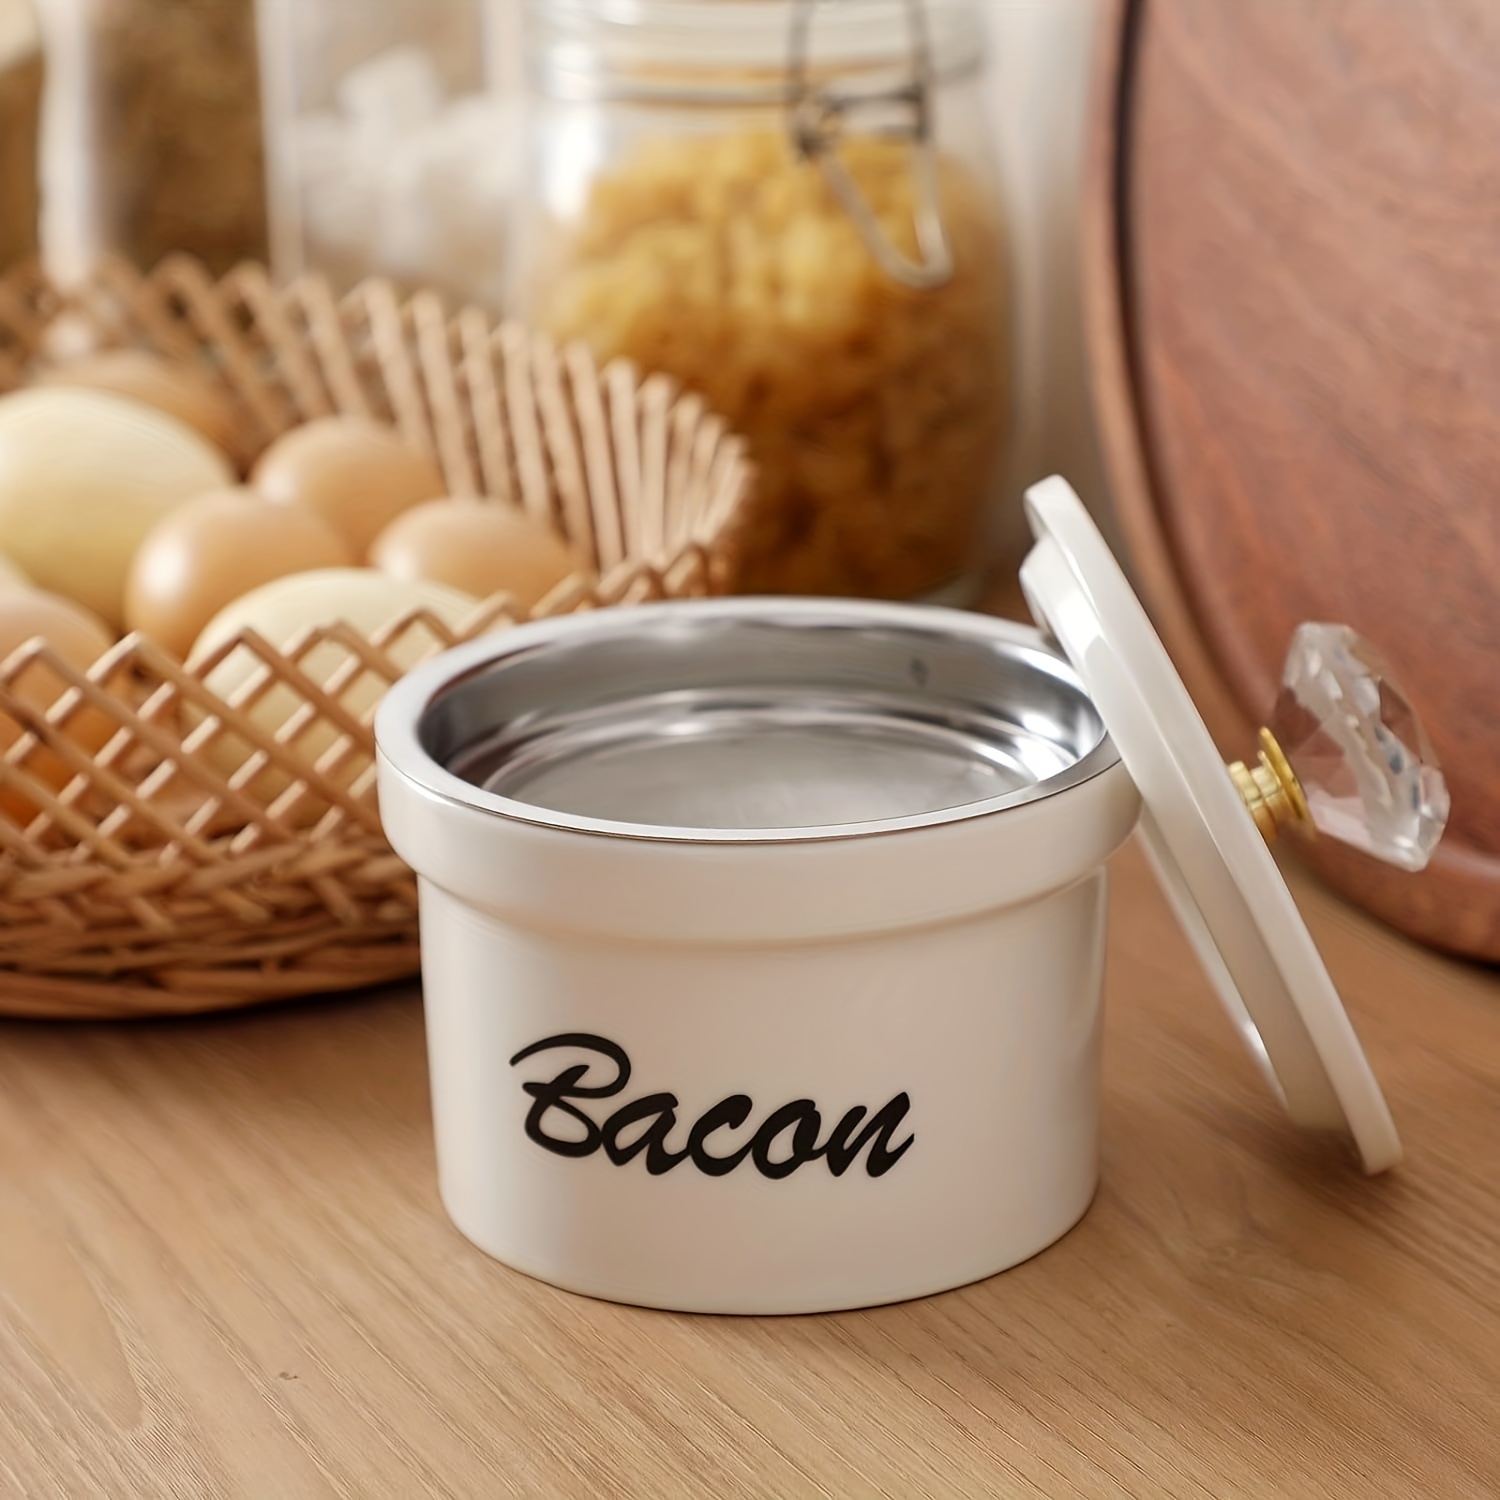 Cooking Oil Bacon Grease Keeper Storage Container With Strainer